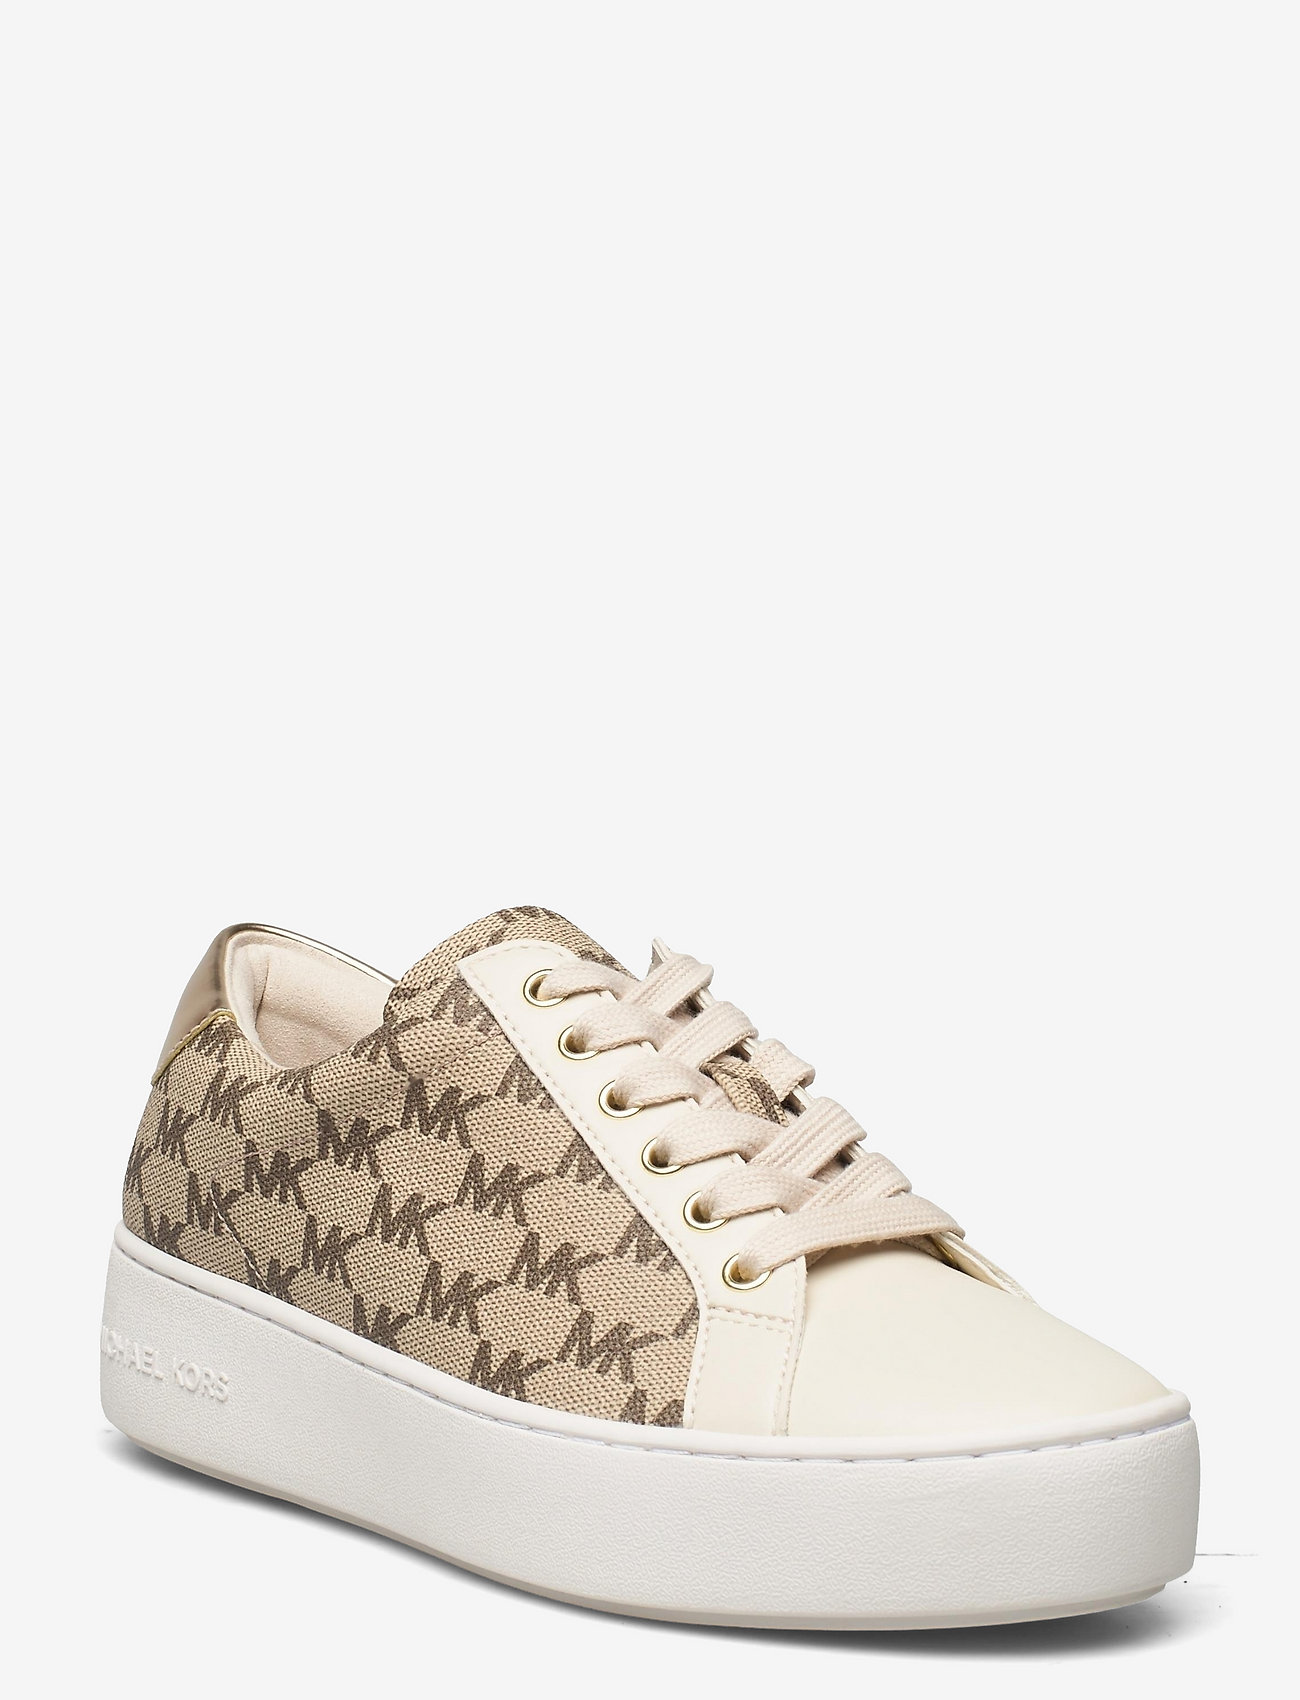 Michael Kors Poppy Lace Up - Low top sneakers | Boozt.com